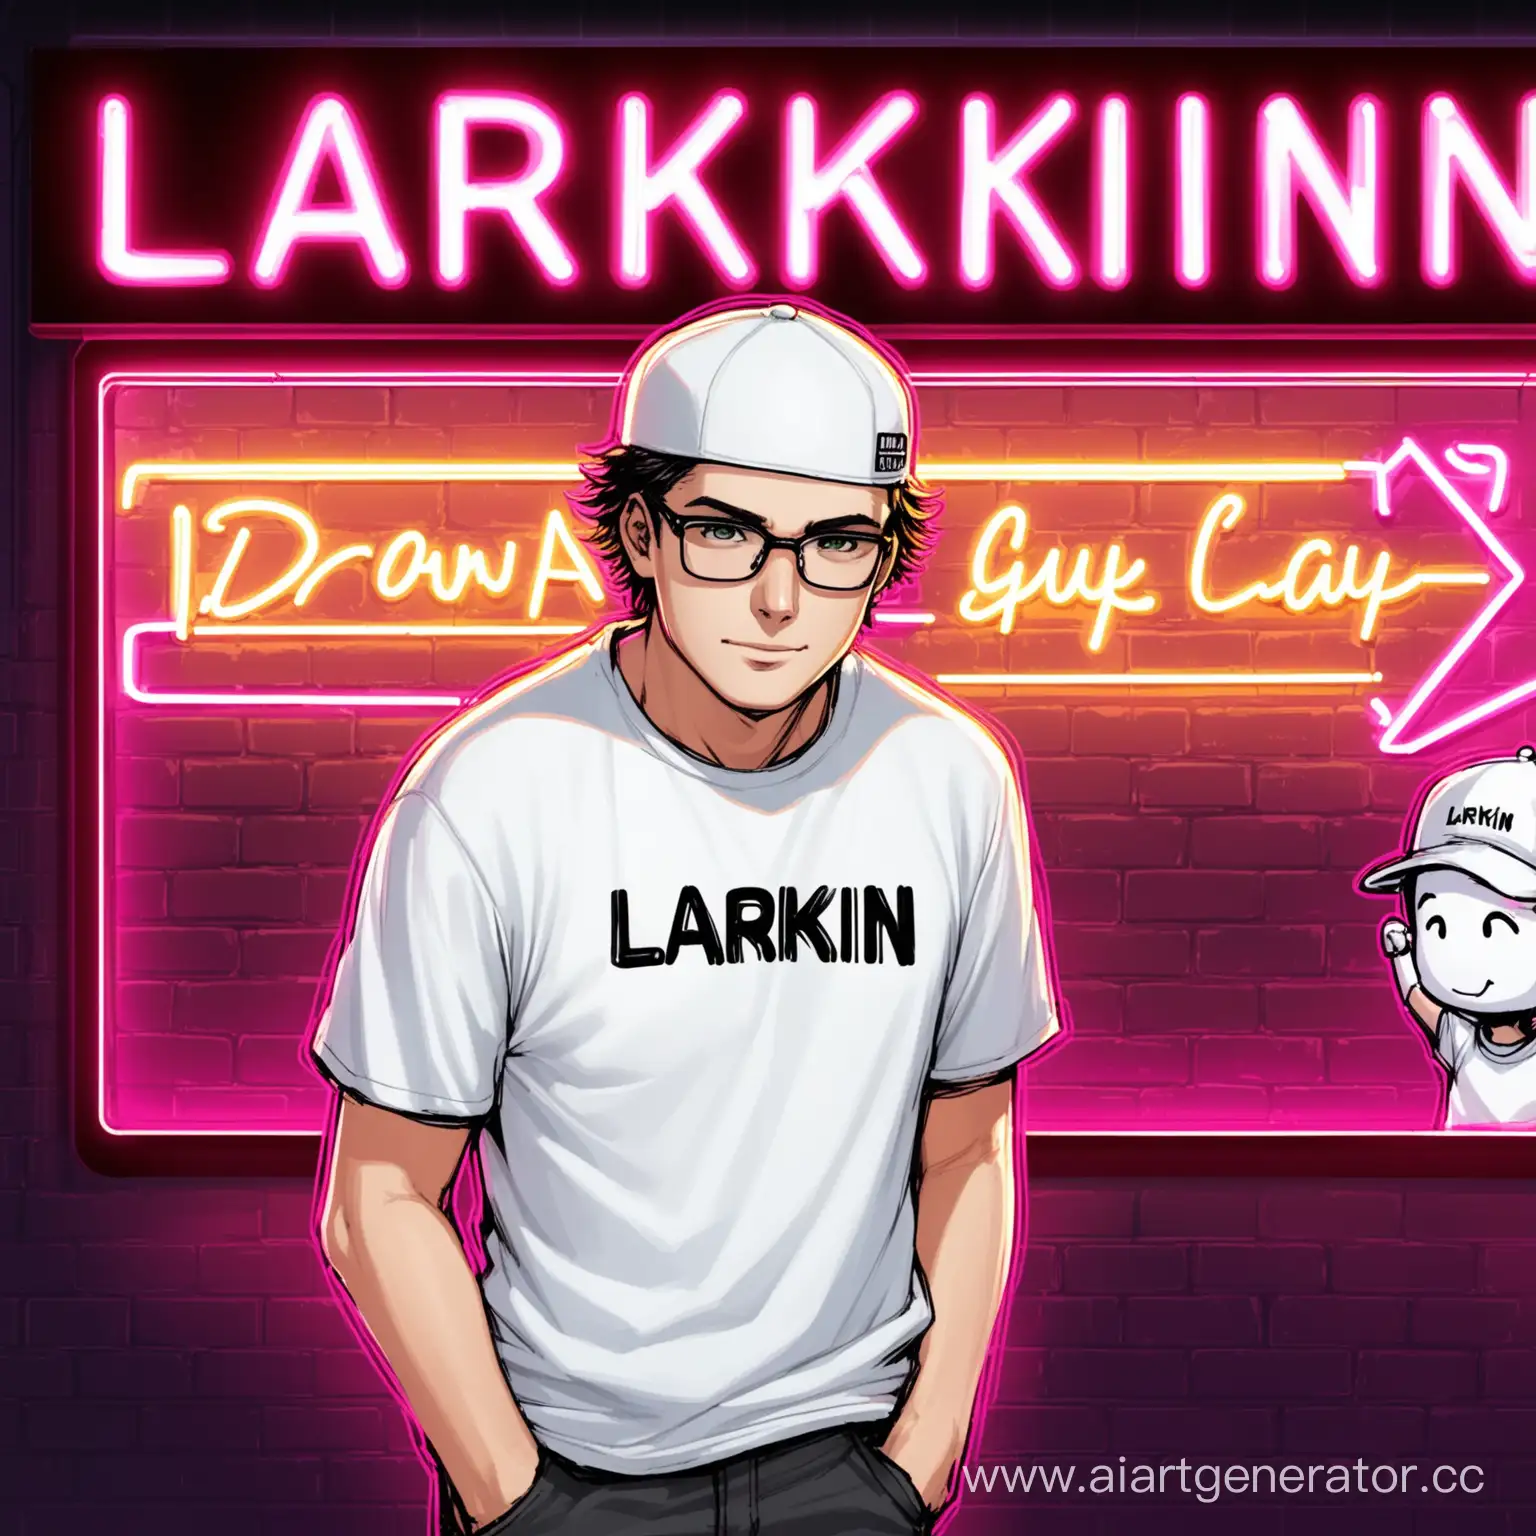 Cool-Streamer-Guy-with-White-Cap-and-Tshirt-posing-in-front-of-LARKIN-Neon-Sign